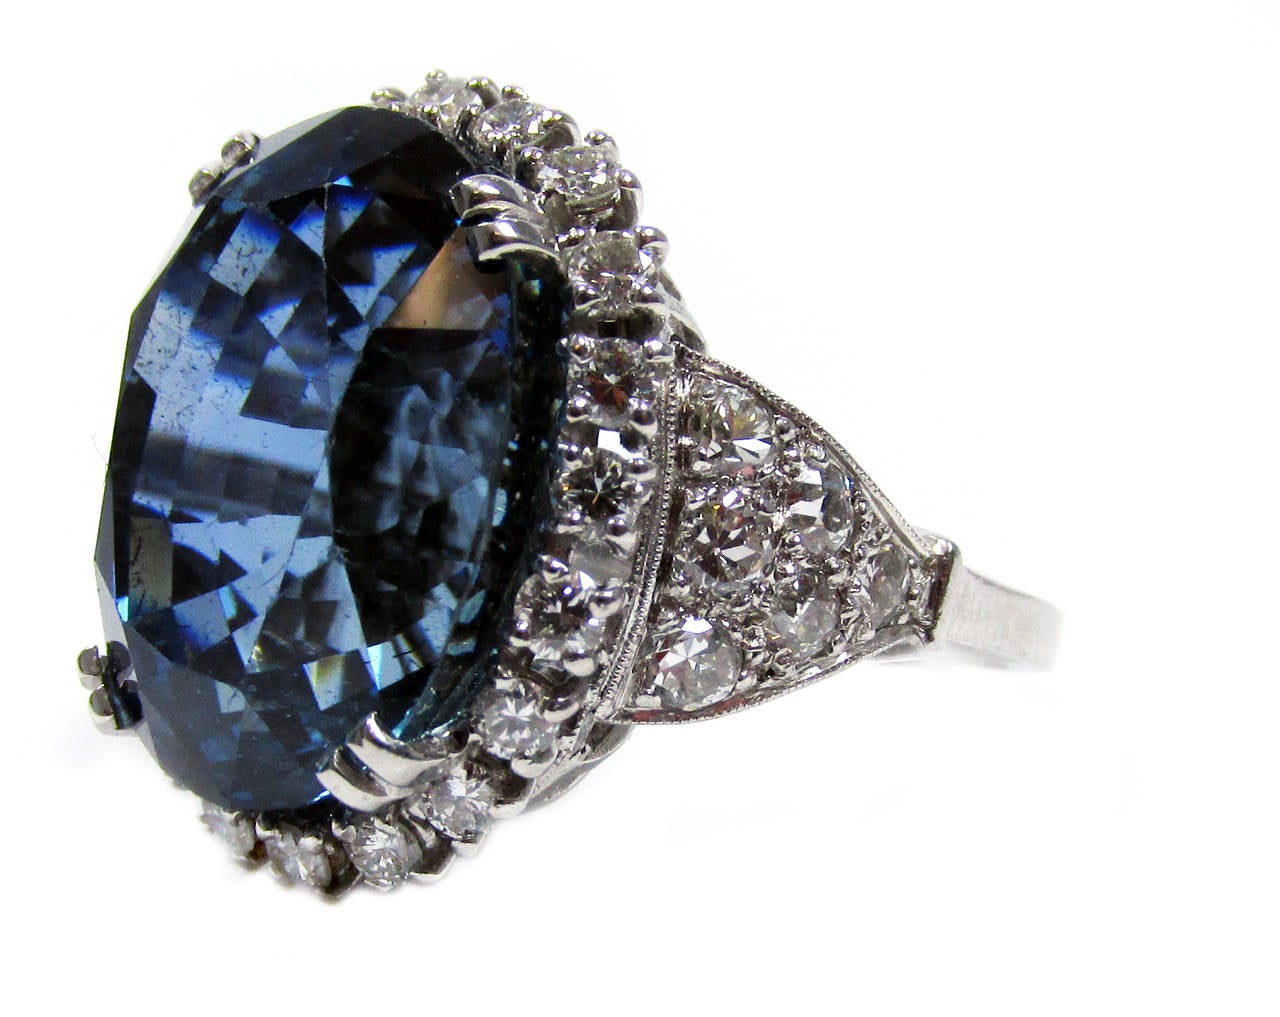 22.12 ct Burma sapphire platinum diamond vintage ring, AGL cetified, no heat treatment or enhancement,  further set with 32 round brilliant cut diamonds weighing approx. 2 cts total, size 6, sizable